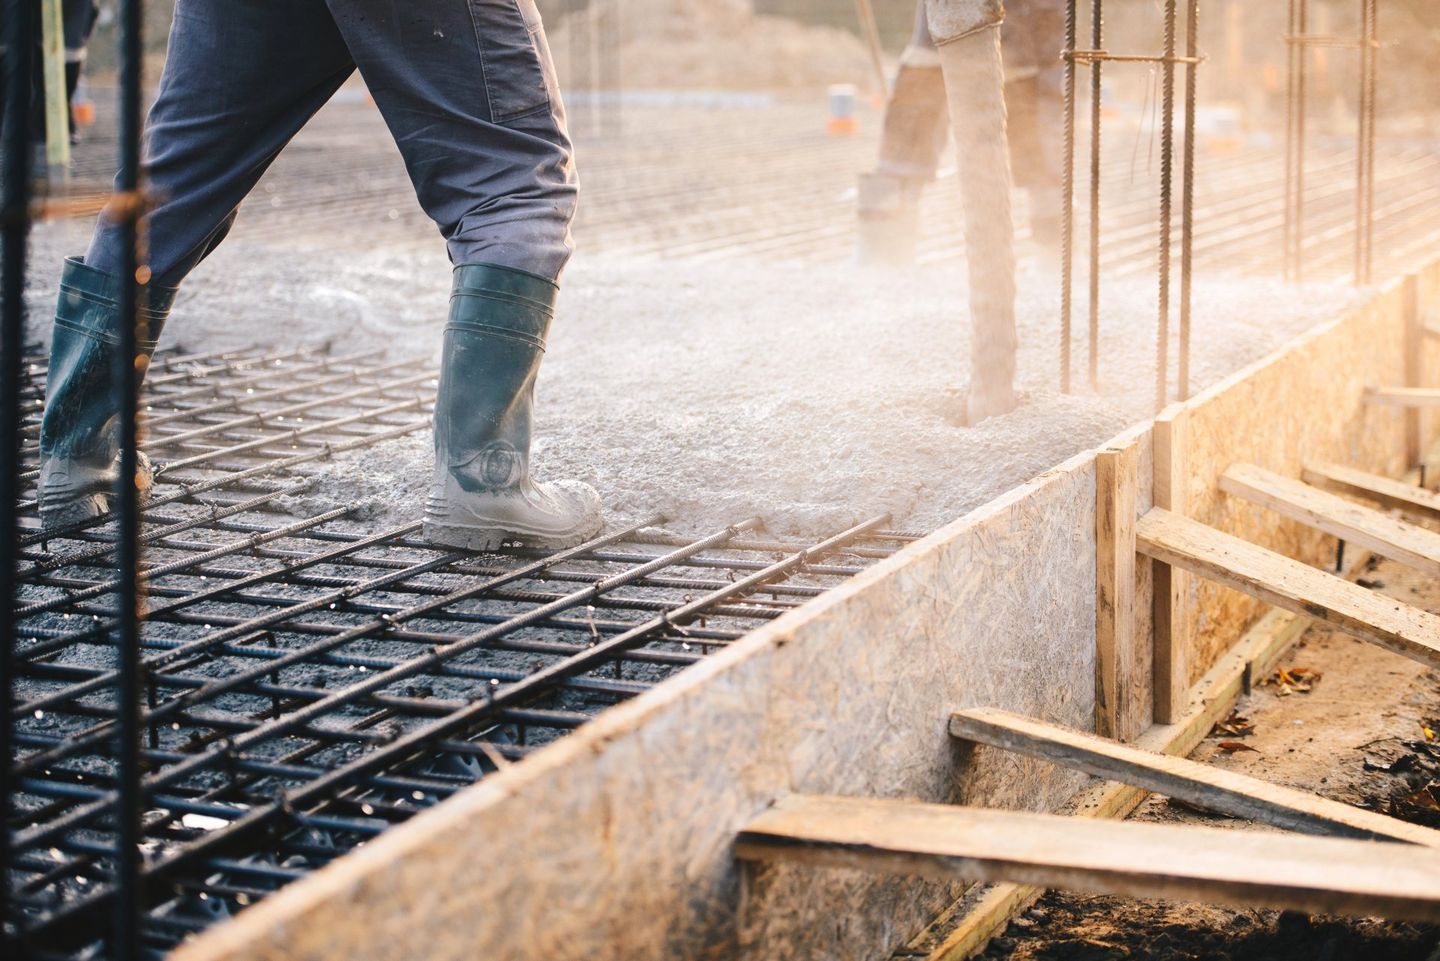 Concreting floors of buildings — Benny’s Concrete Formwork & Reinforcement in Northern Rivers, NSW